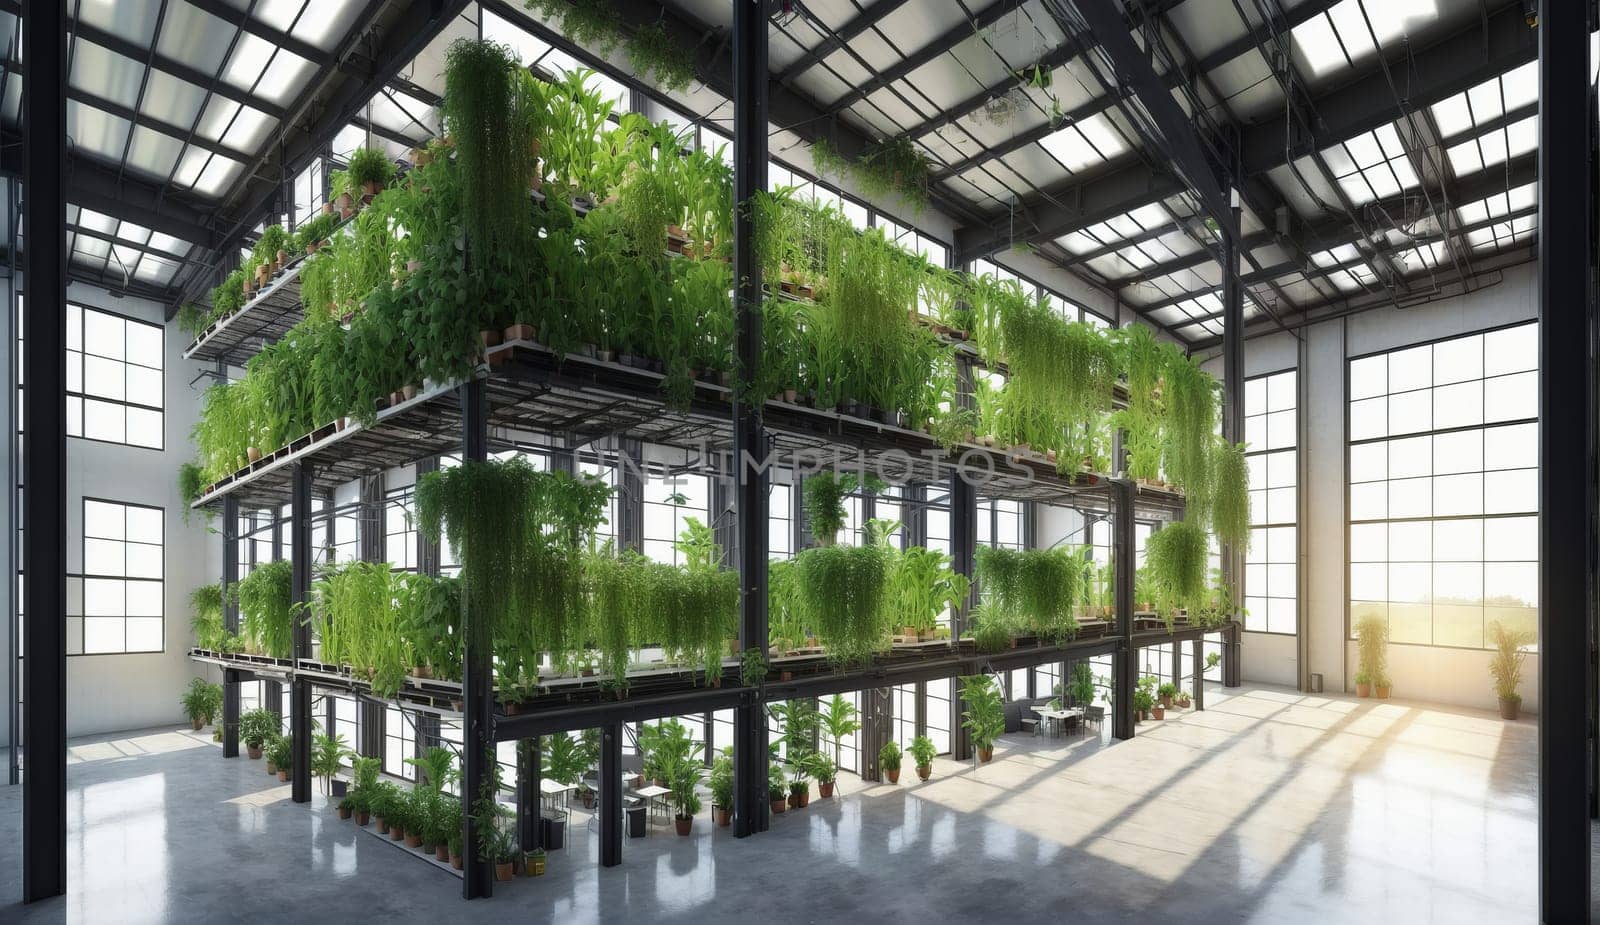 The commercial building boasts a large room adorned with an array of green plants, enhancing the facade with a mix of glass, metal, and wood fixtures